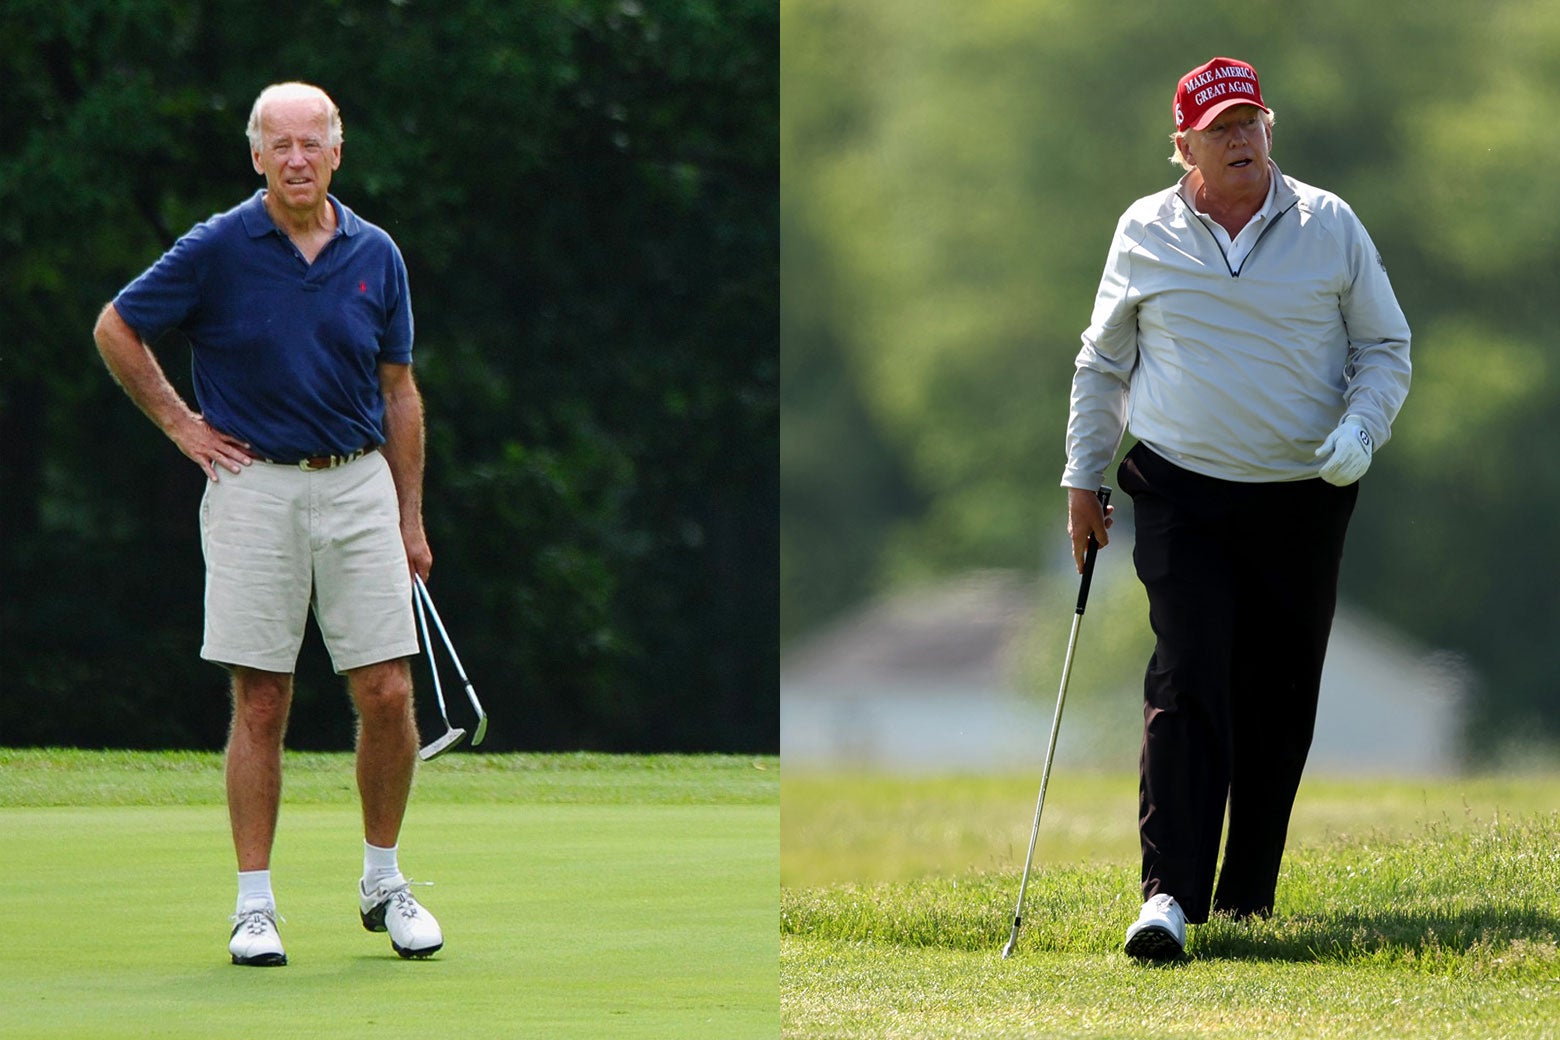 Donald Trump and Joe Biden in side-by-side photos of them on a golf course. 